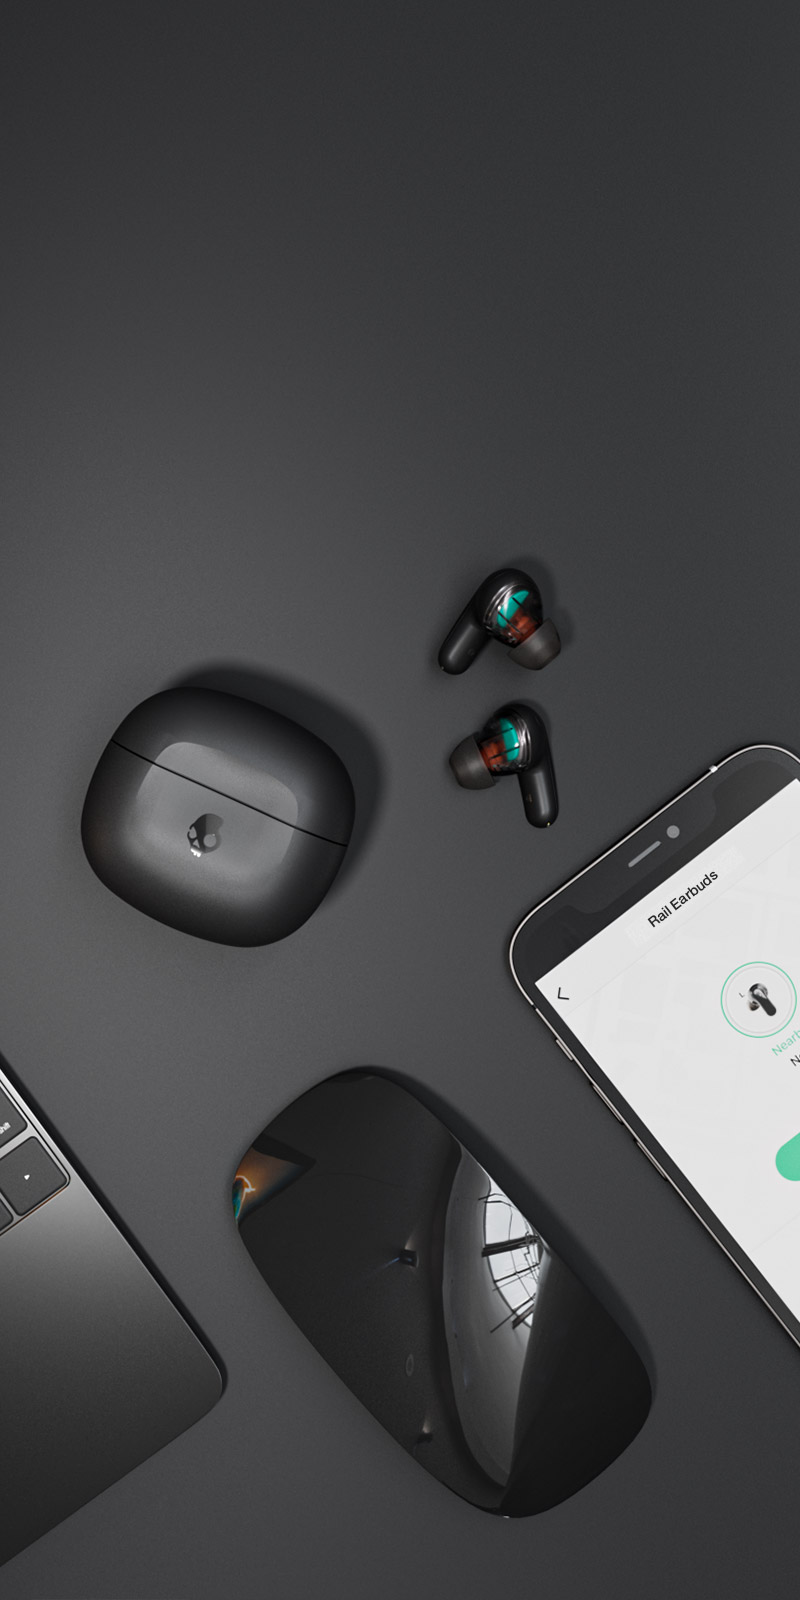 Rail True Wireless Earbuds are noise-isolating, water resistant, easy to  pair and control, 42 hours of battery plus rapid charge